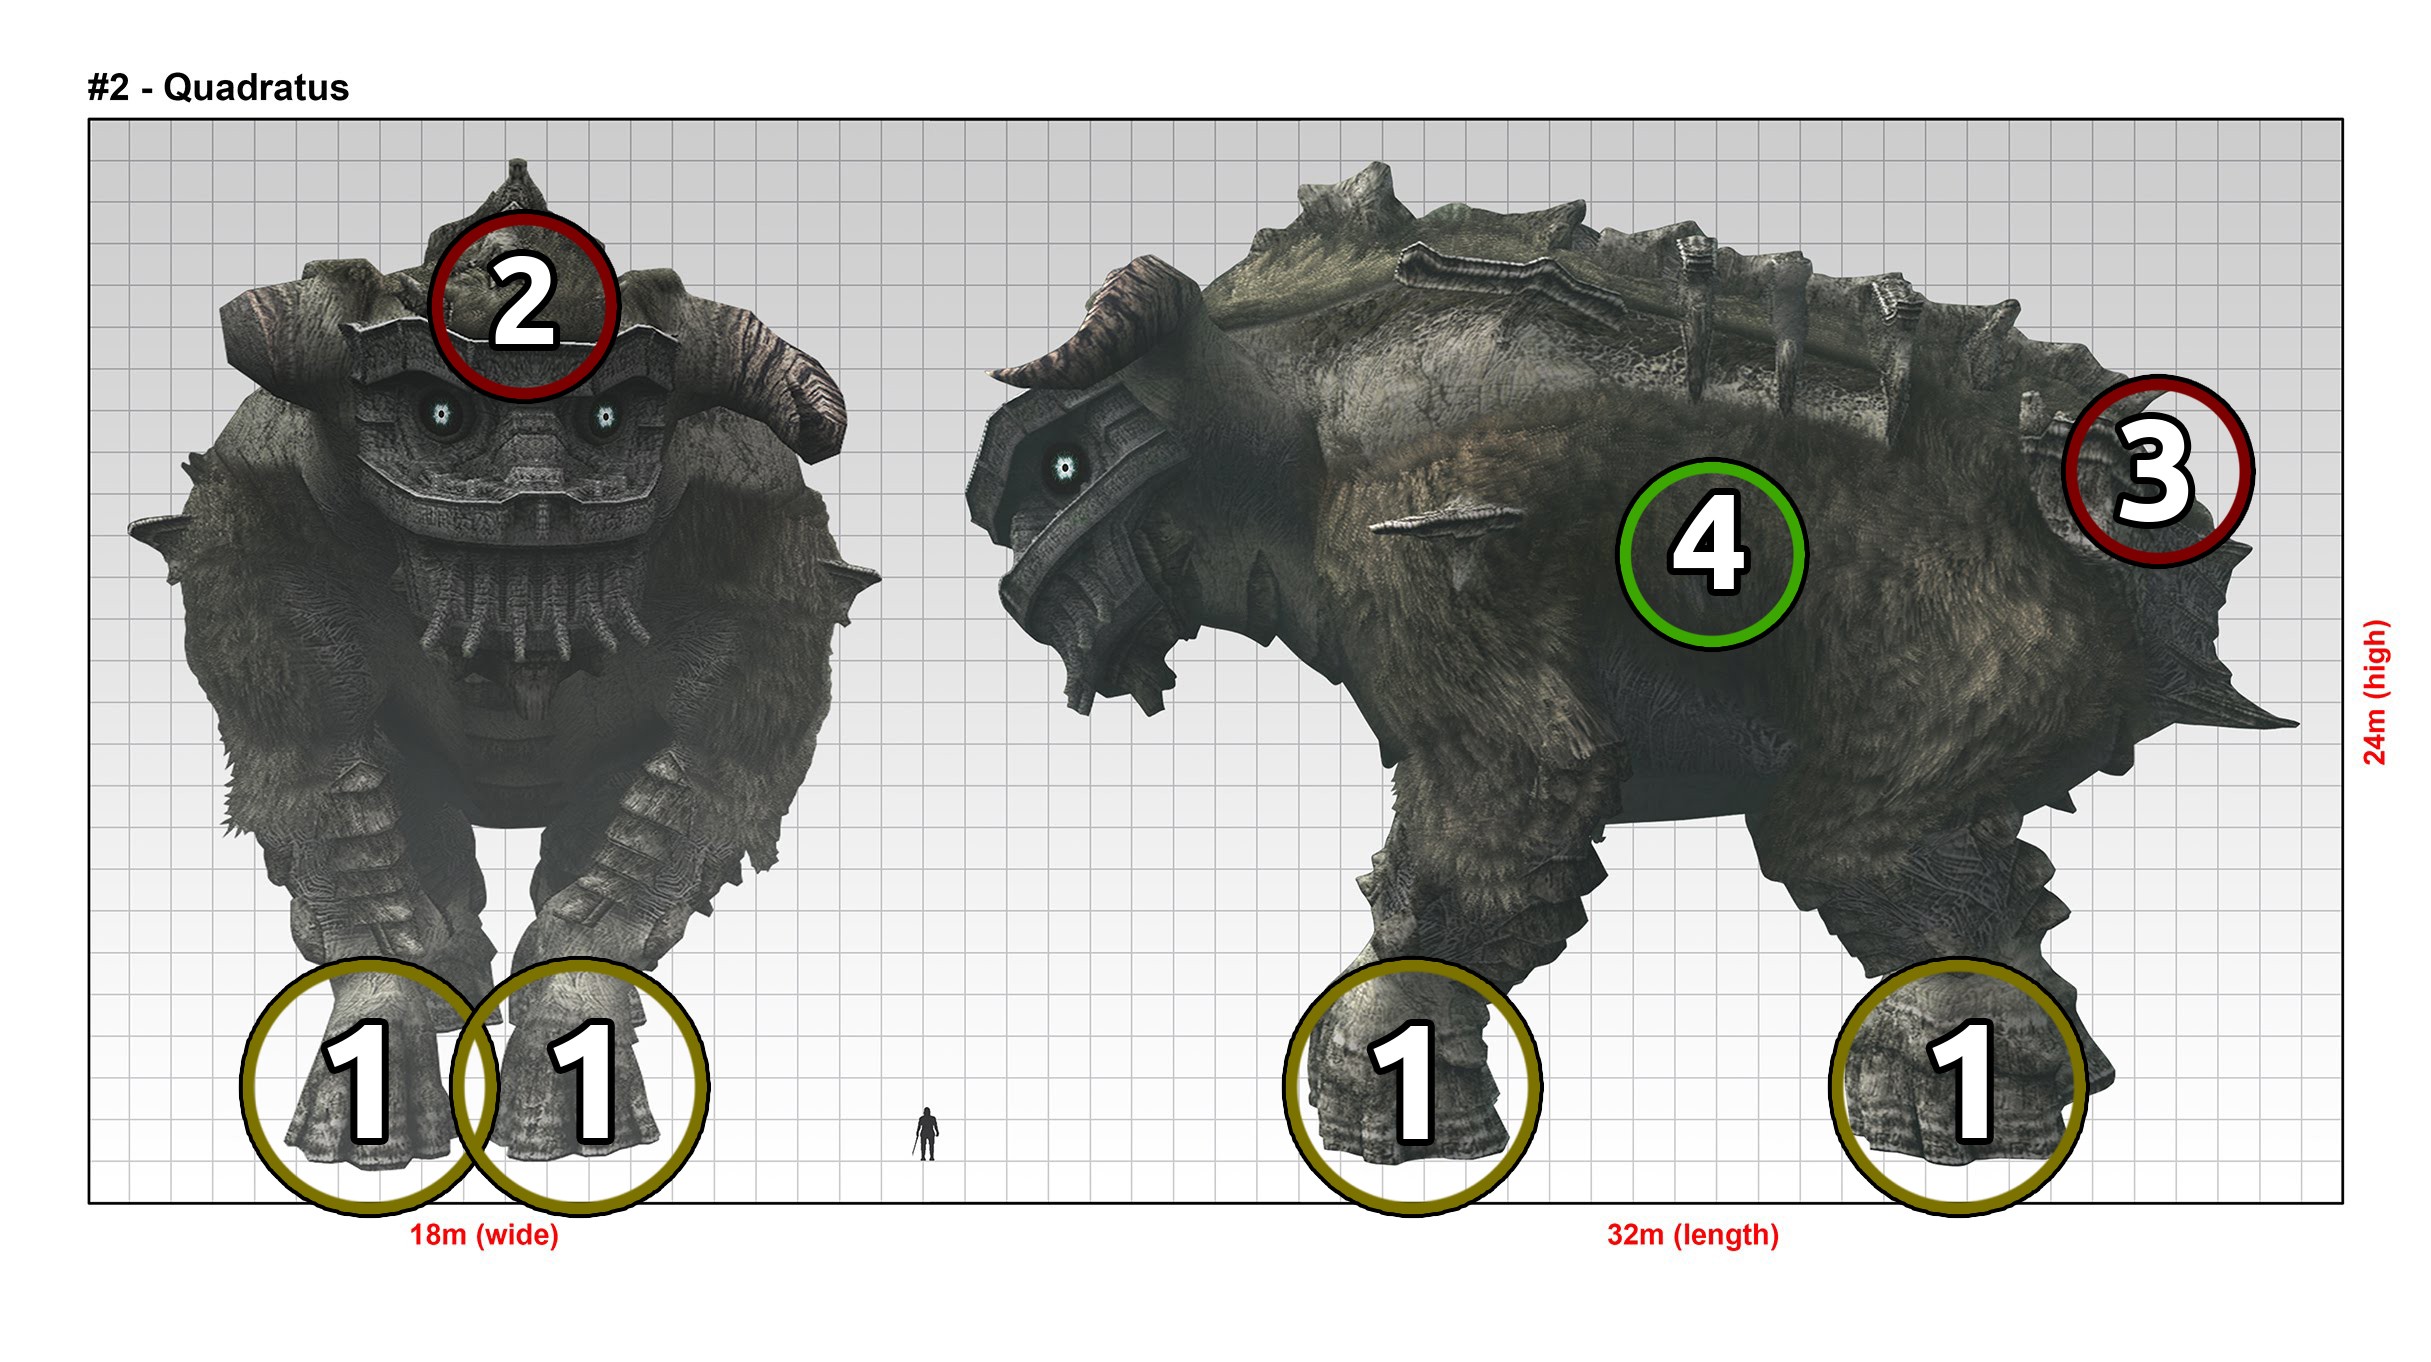 Shadow of the Colossus PS3 Trophy guide